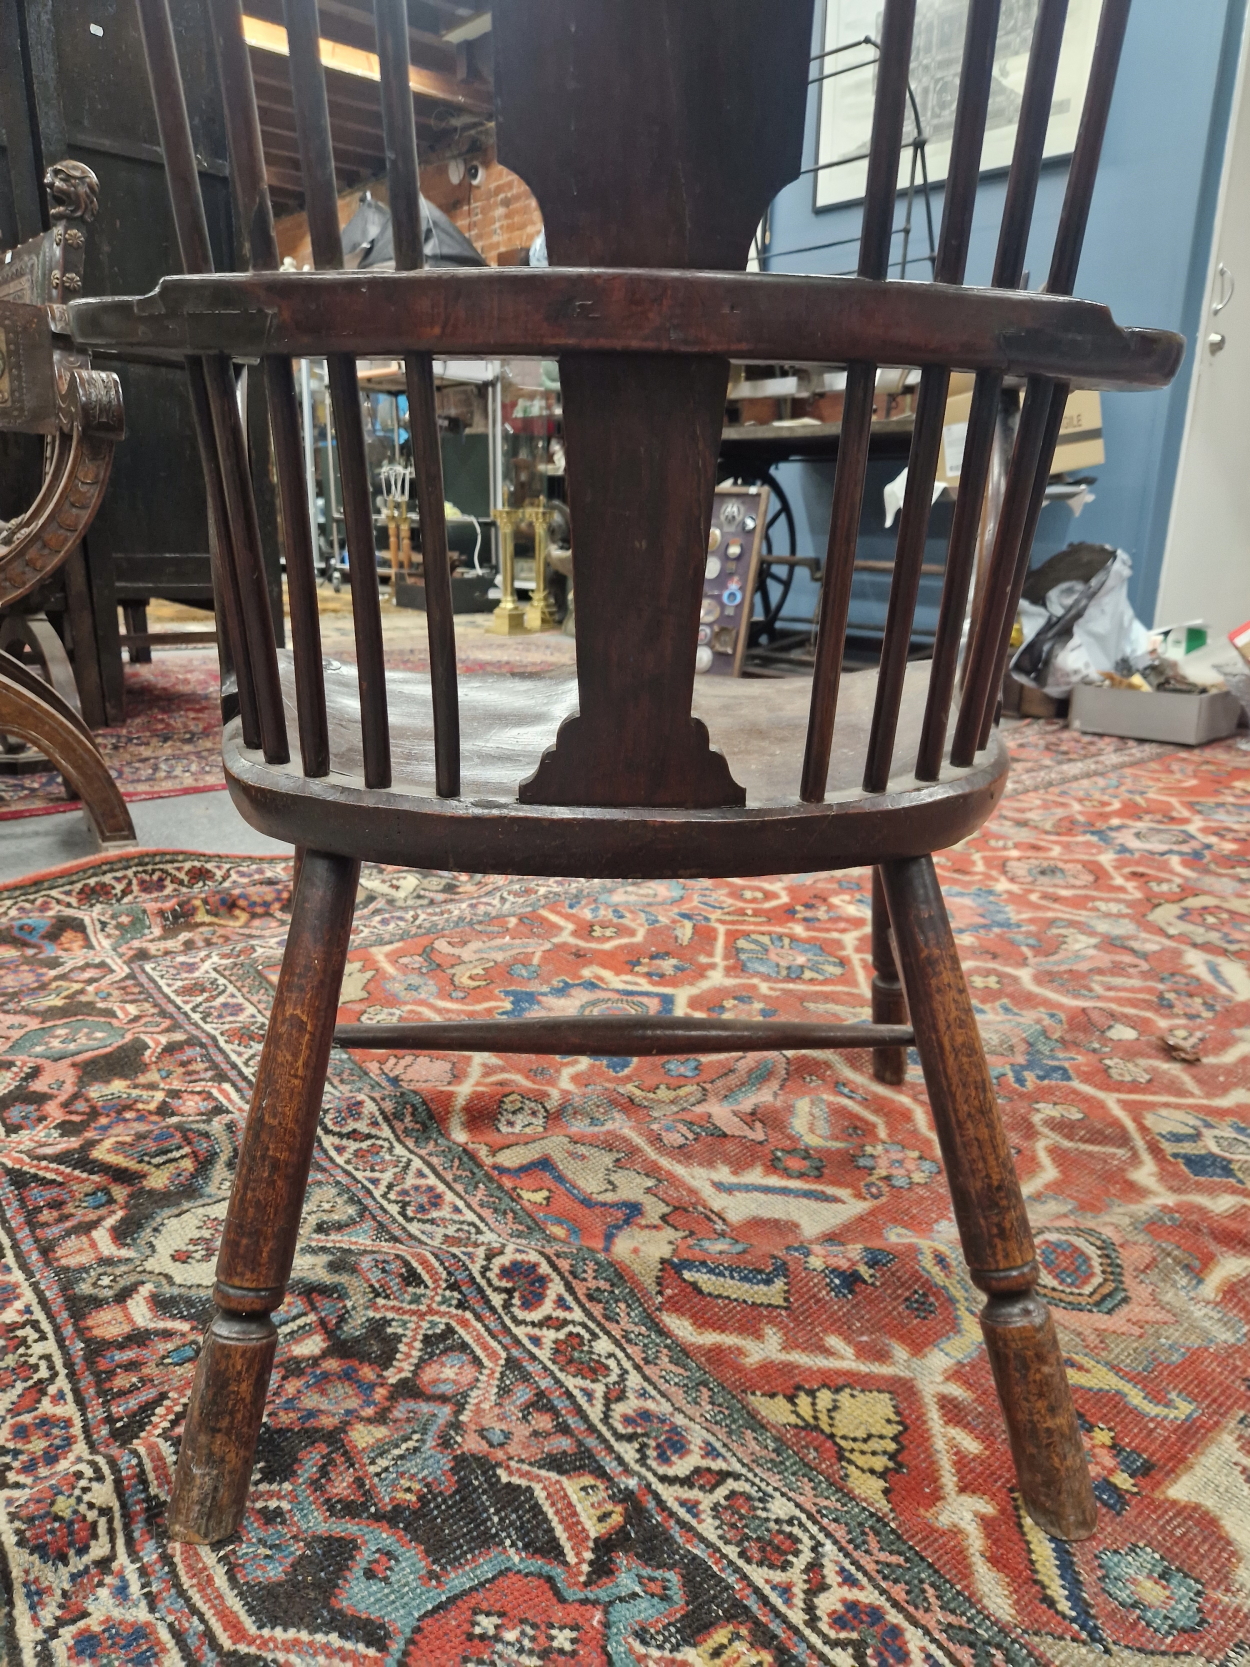 AN 18TH / 19TH CENTURY COUNTRY MADE WINDSOR TYPE CHAIR WITH SHAPED CREST RAIL AND BALUSTER BACK - Image 10 of 10